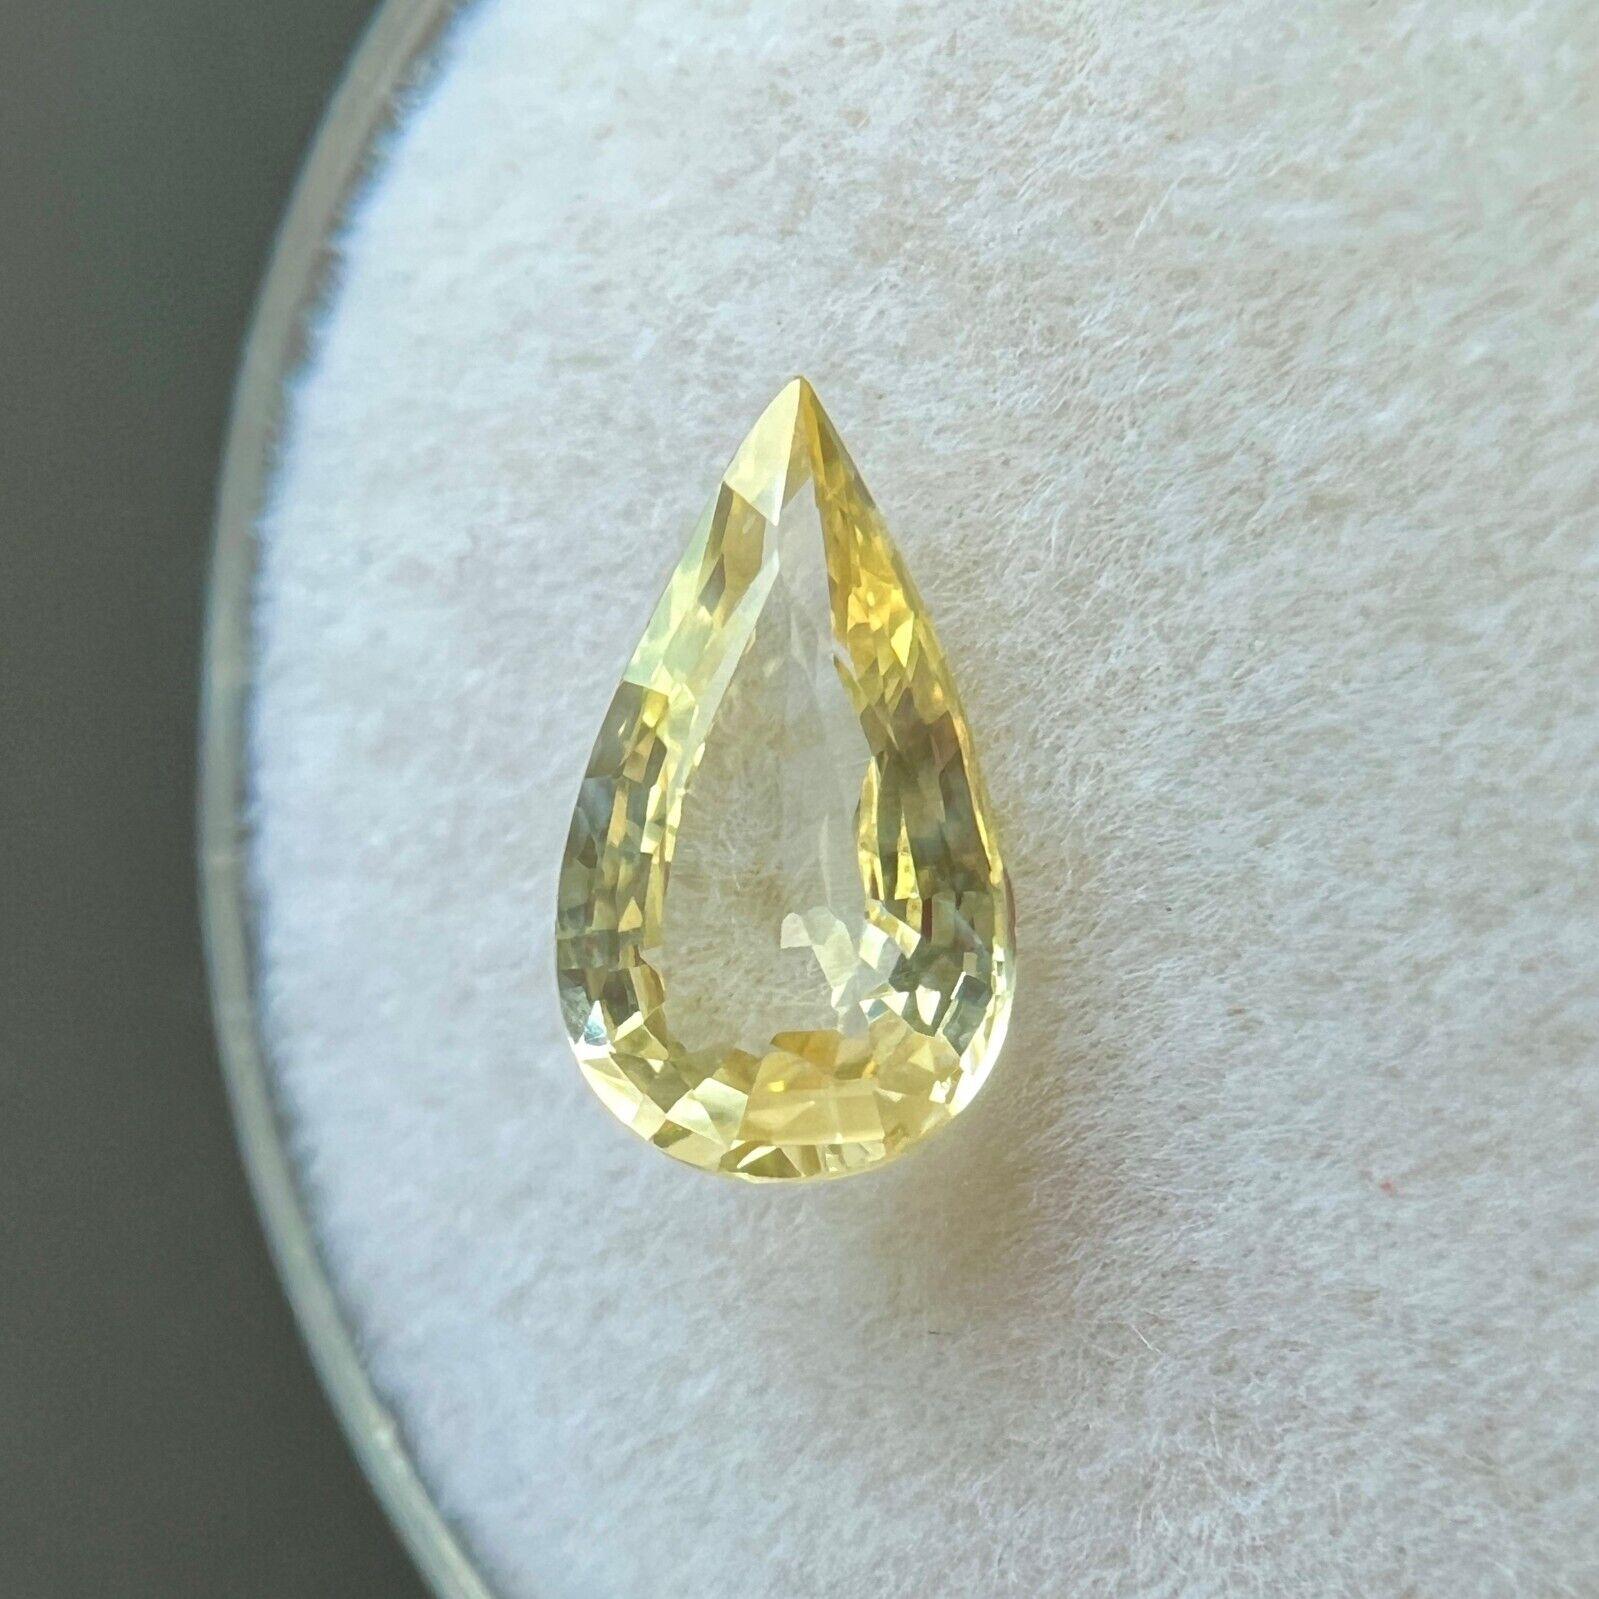 GIA Certified 1.28Ct Ceylon Sapphire Untreated Vivid Yellow Pear Cut For Sale 1